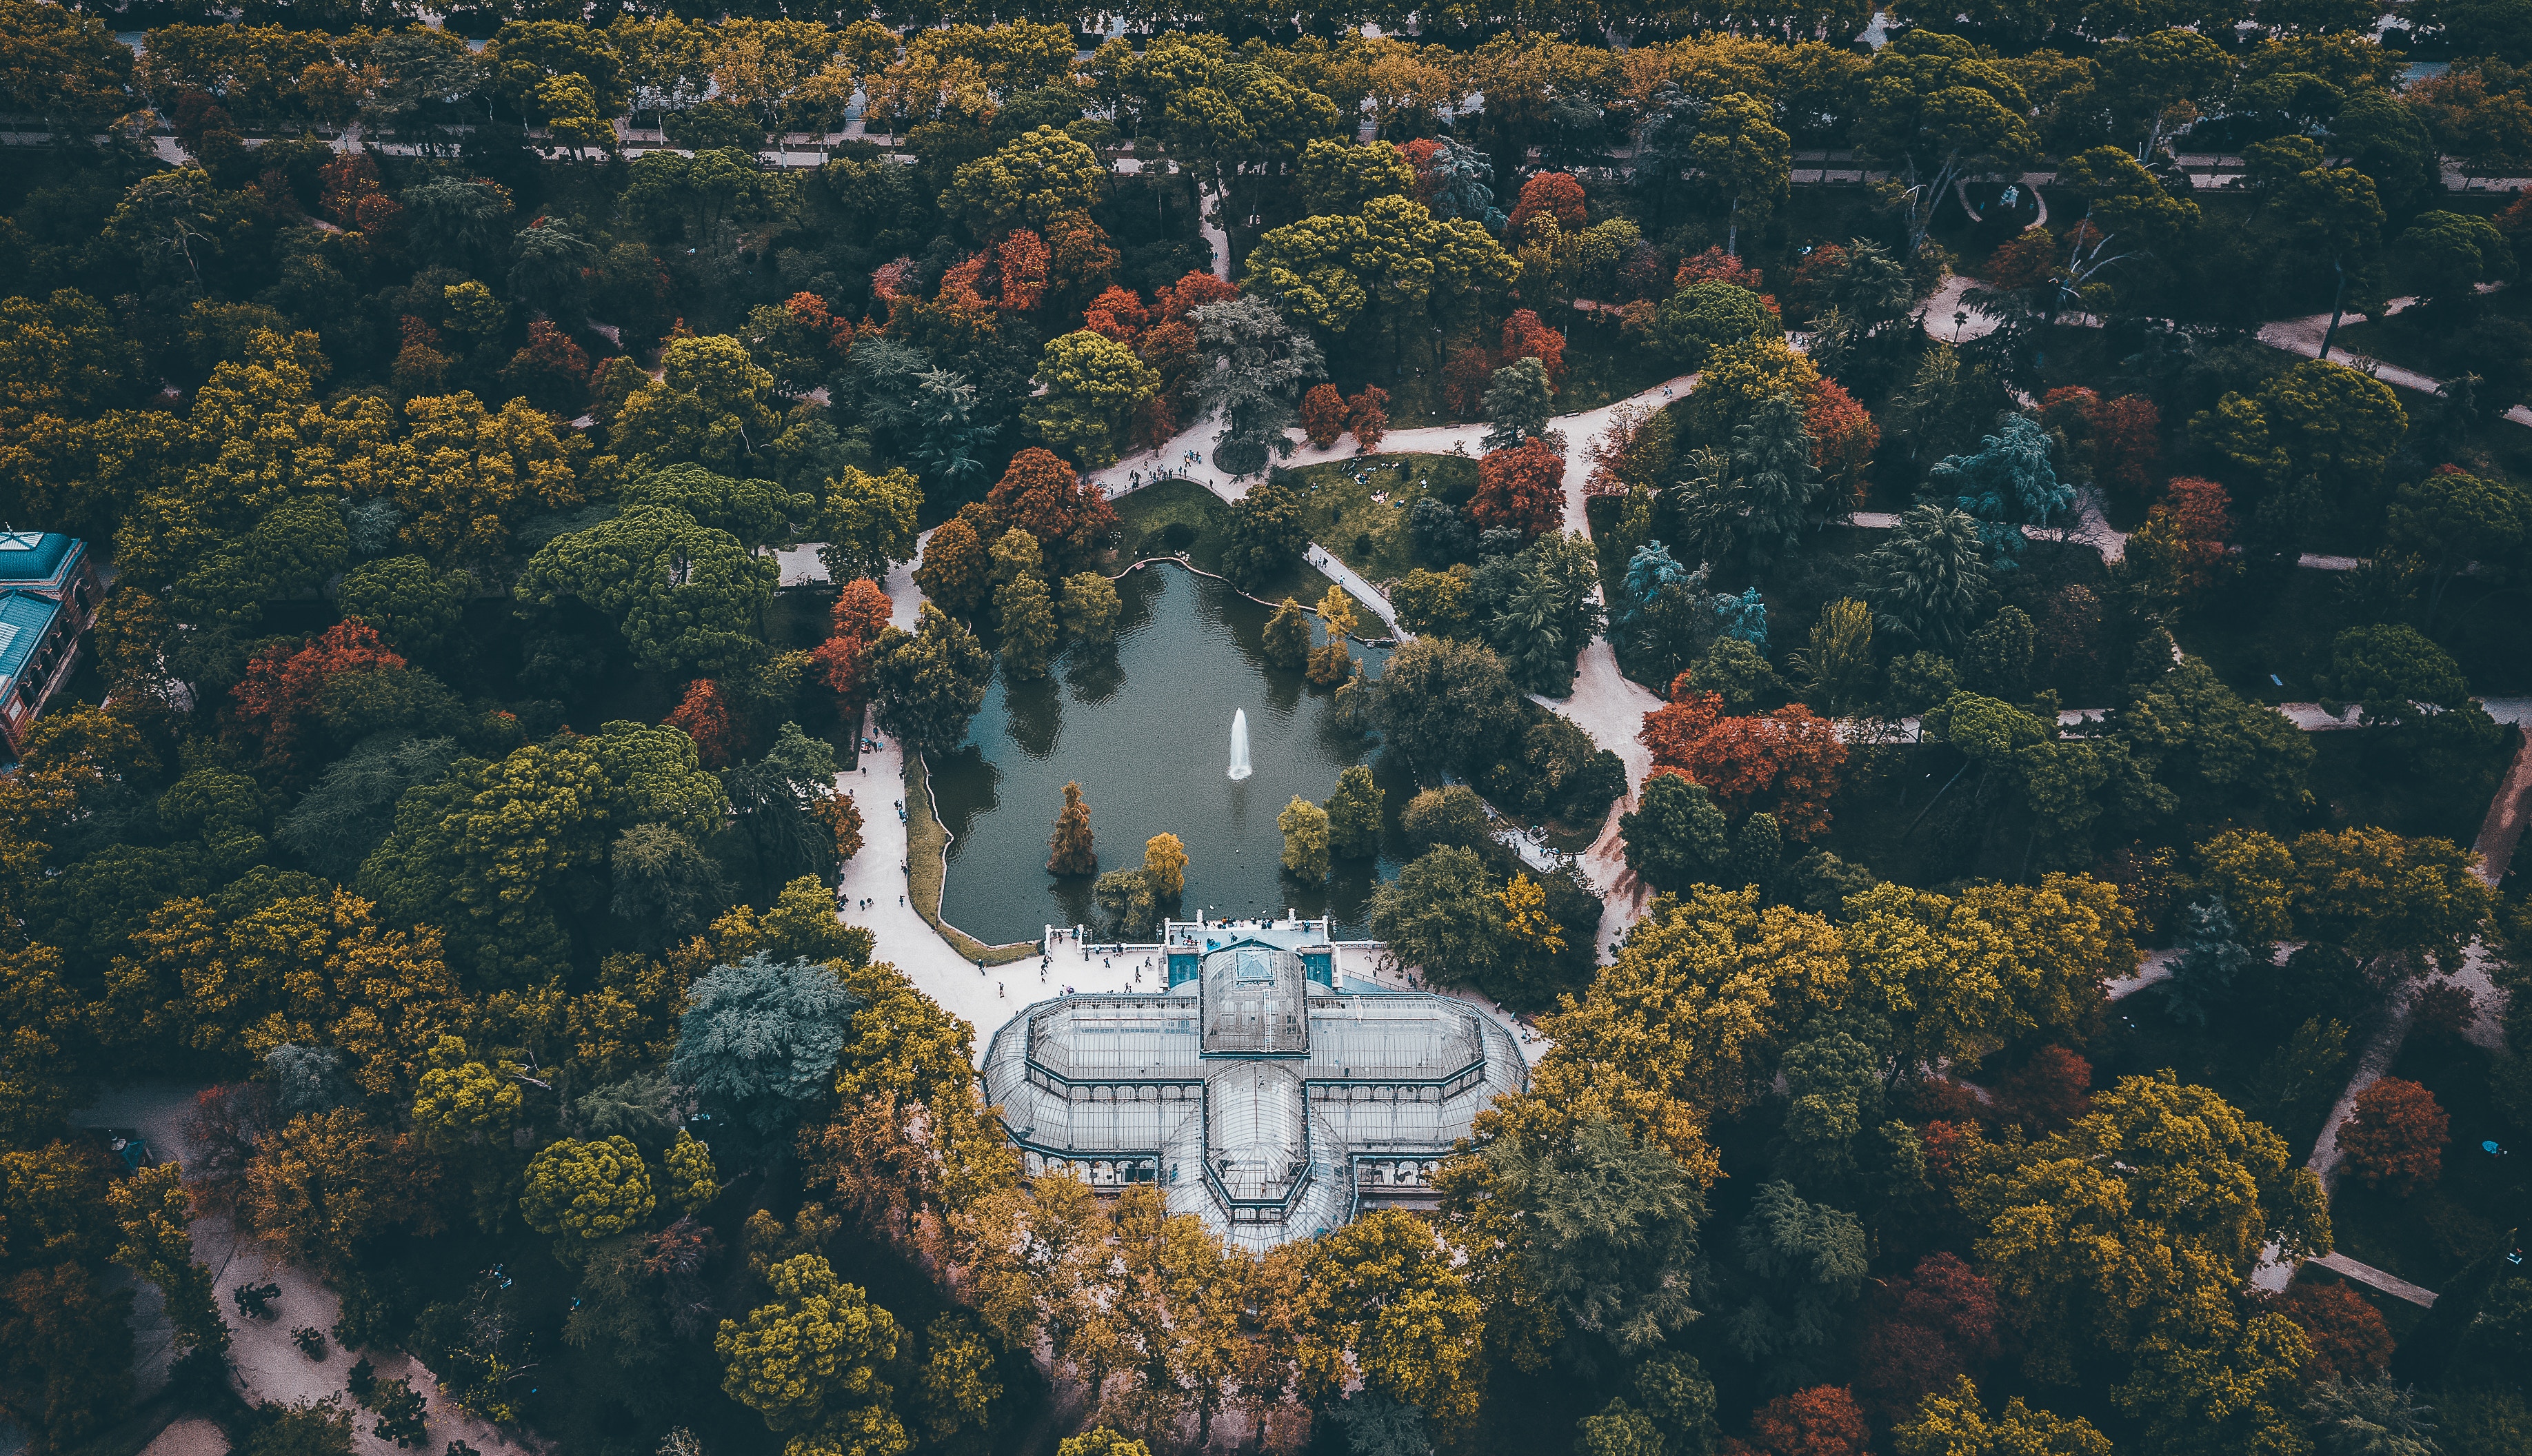 madrid, spain, landscape, cities, trees, architecture, view from above, palace